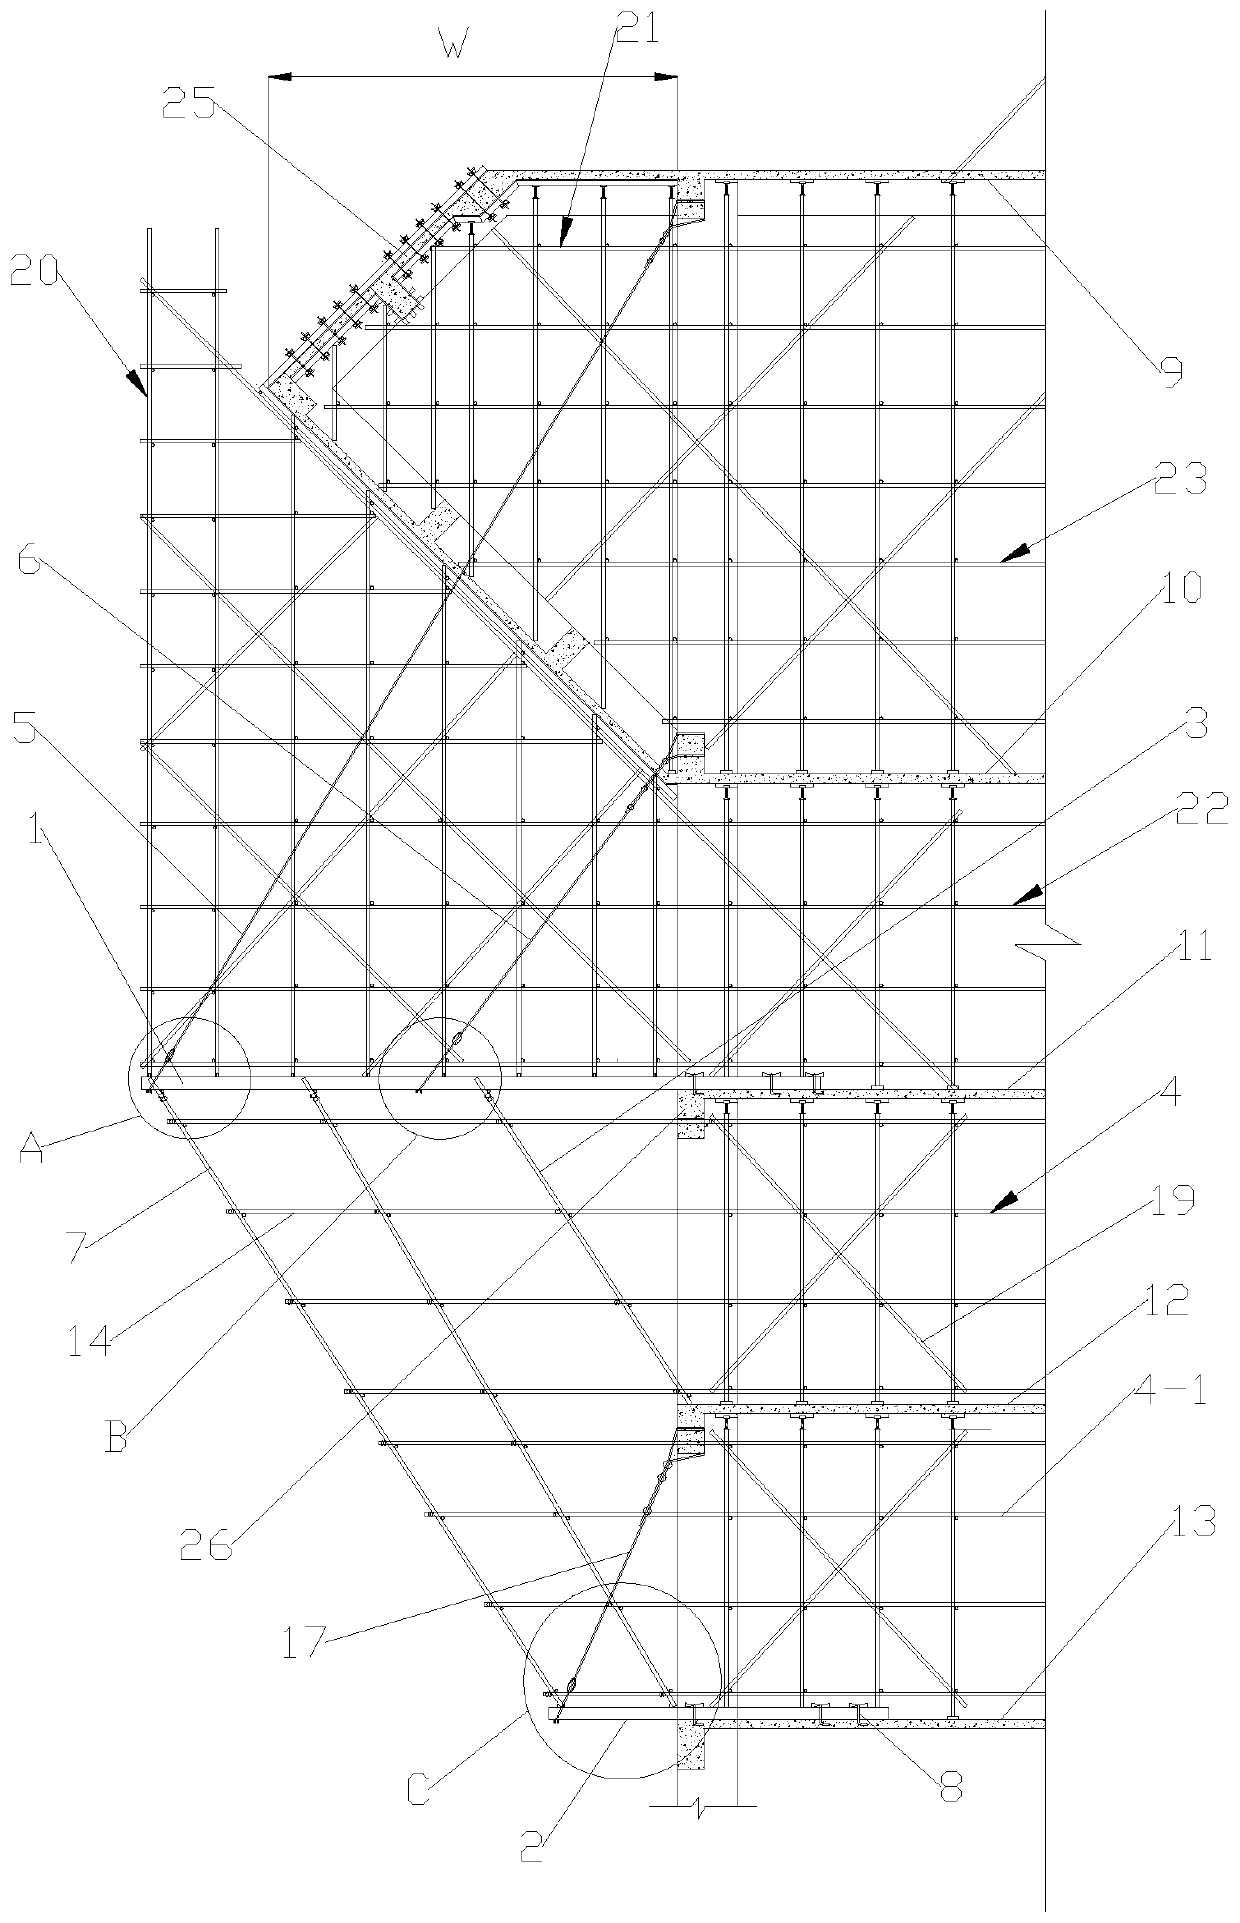 Construction method of aerological overhanging template supporting frame body